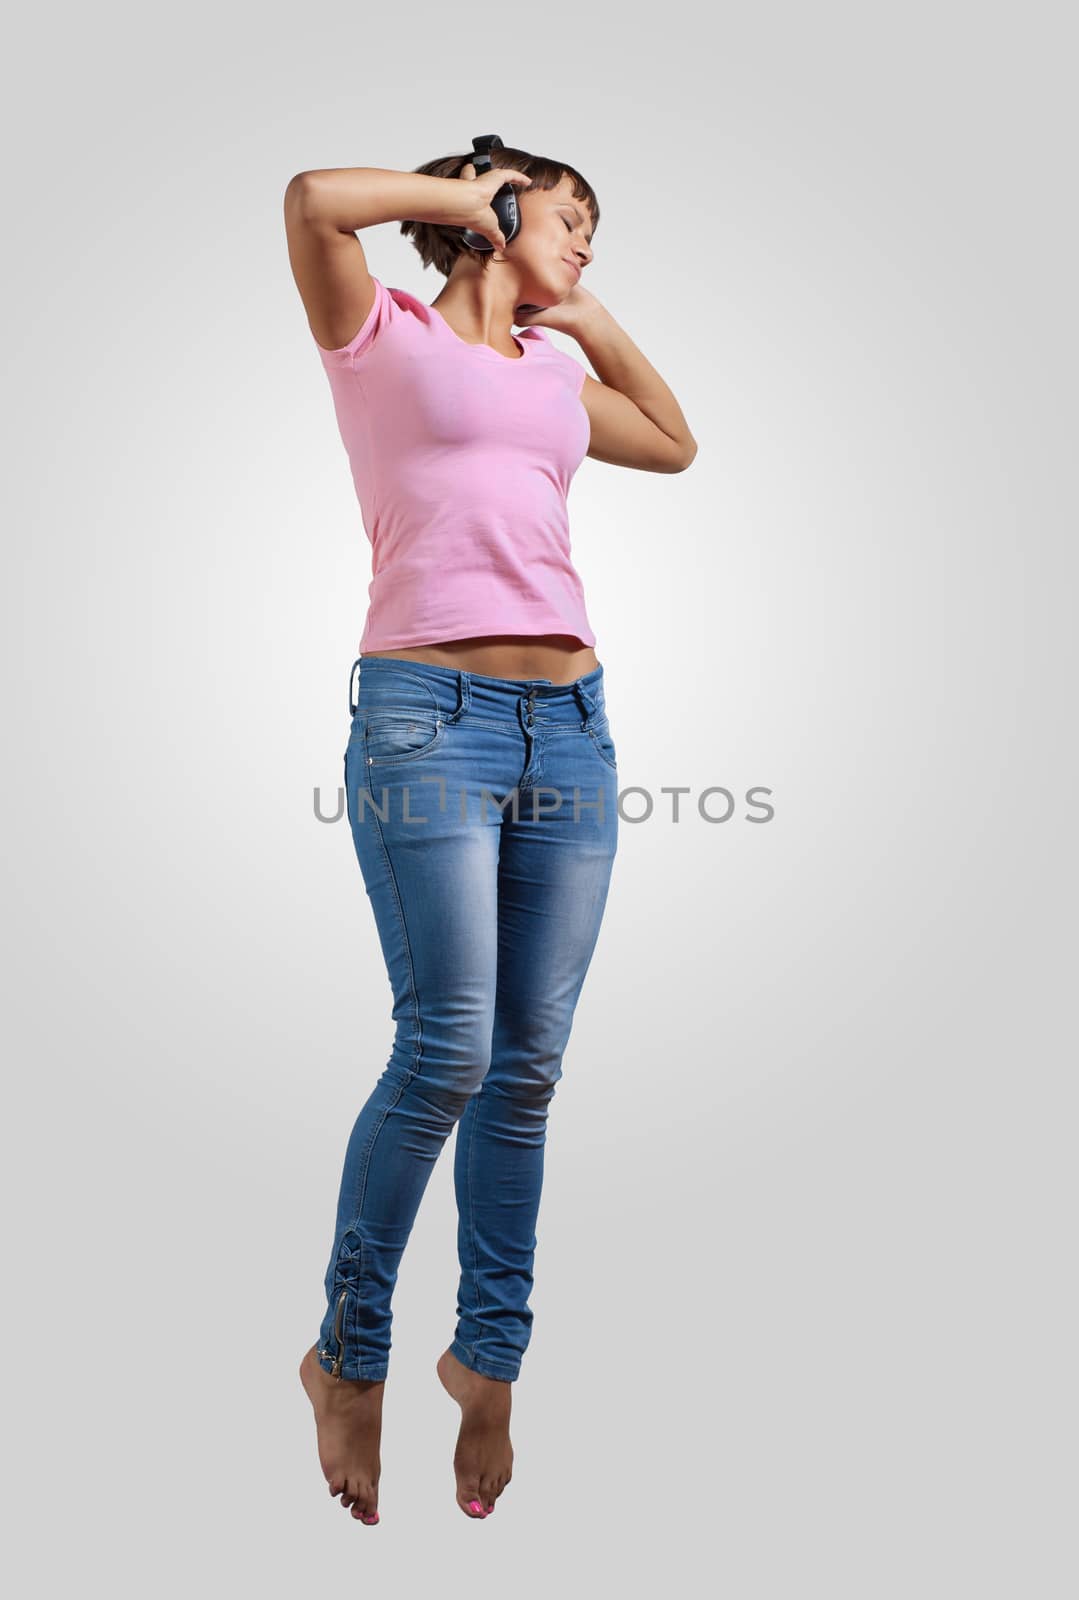 pretty modern slim hip-hop style woman jumping dancing on a colour background